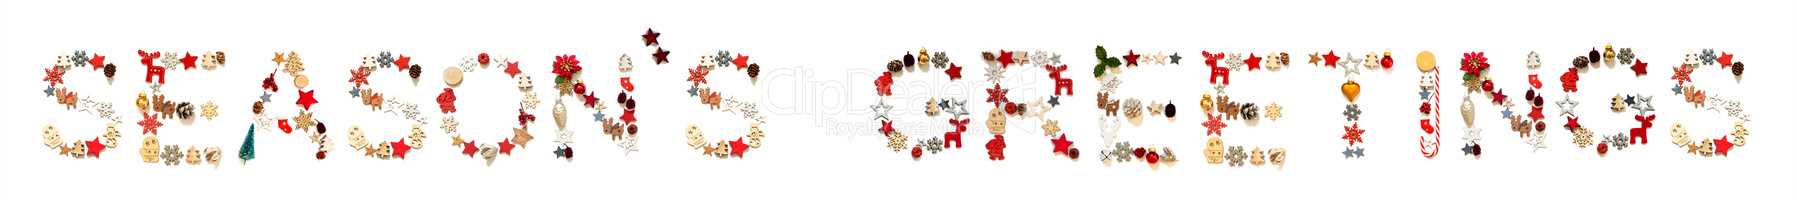 Colorful Christmas Decoration Letter Building Word Seasons Greetings